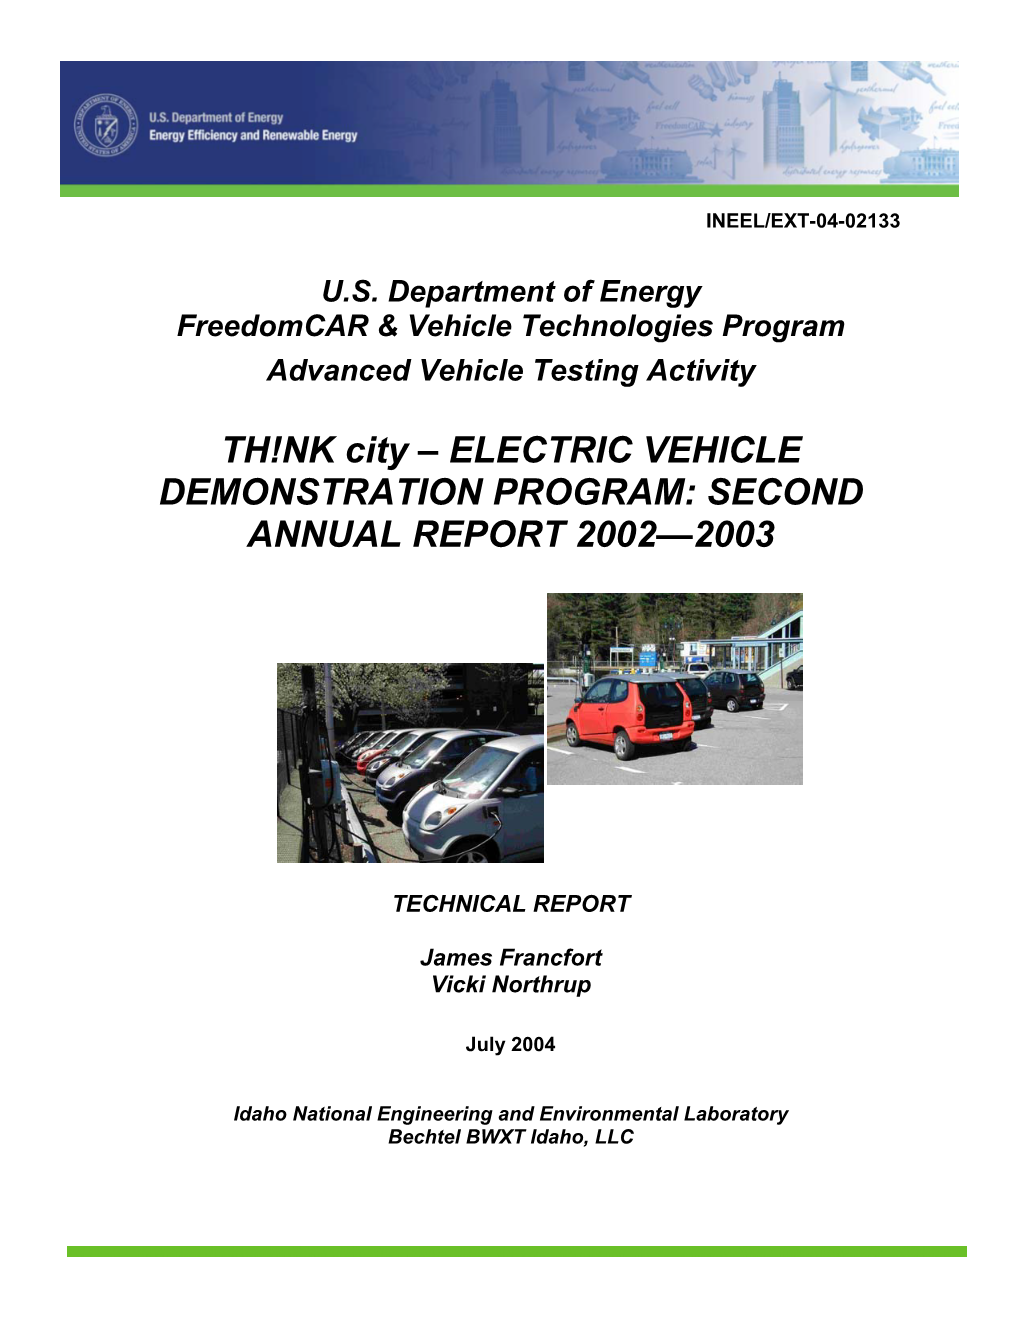 TH!NK City – ELECTRIC VEHICLE DEMONSTRATION PROGRAM: SECOND ANNUAL REPORT 2002—2003